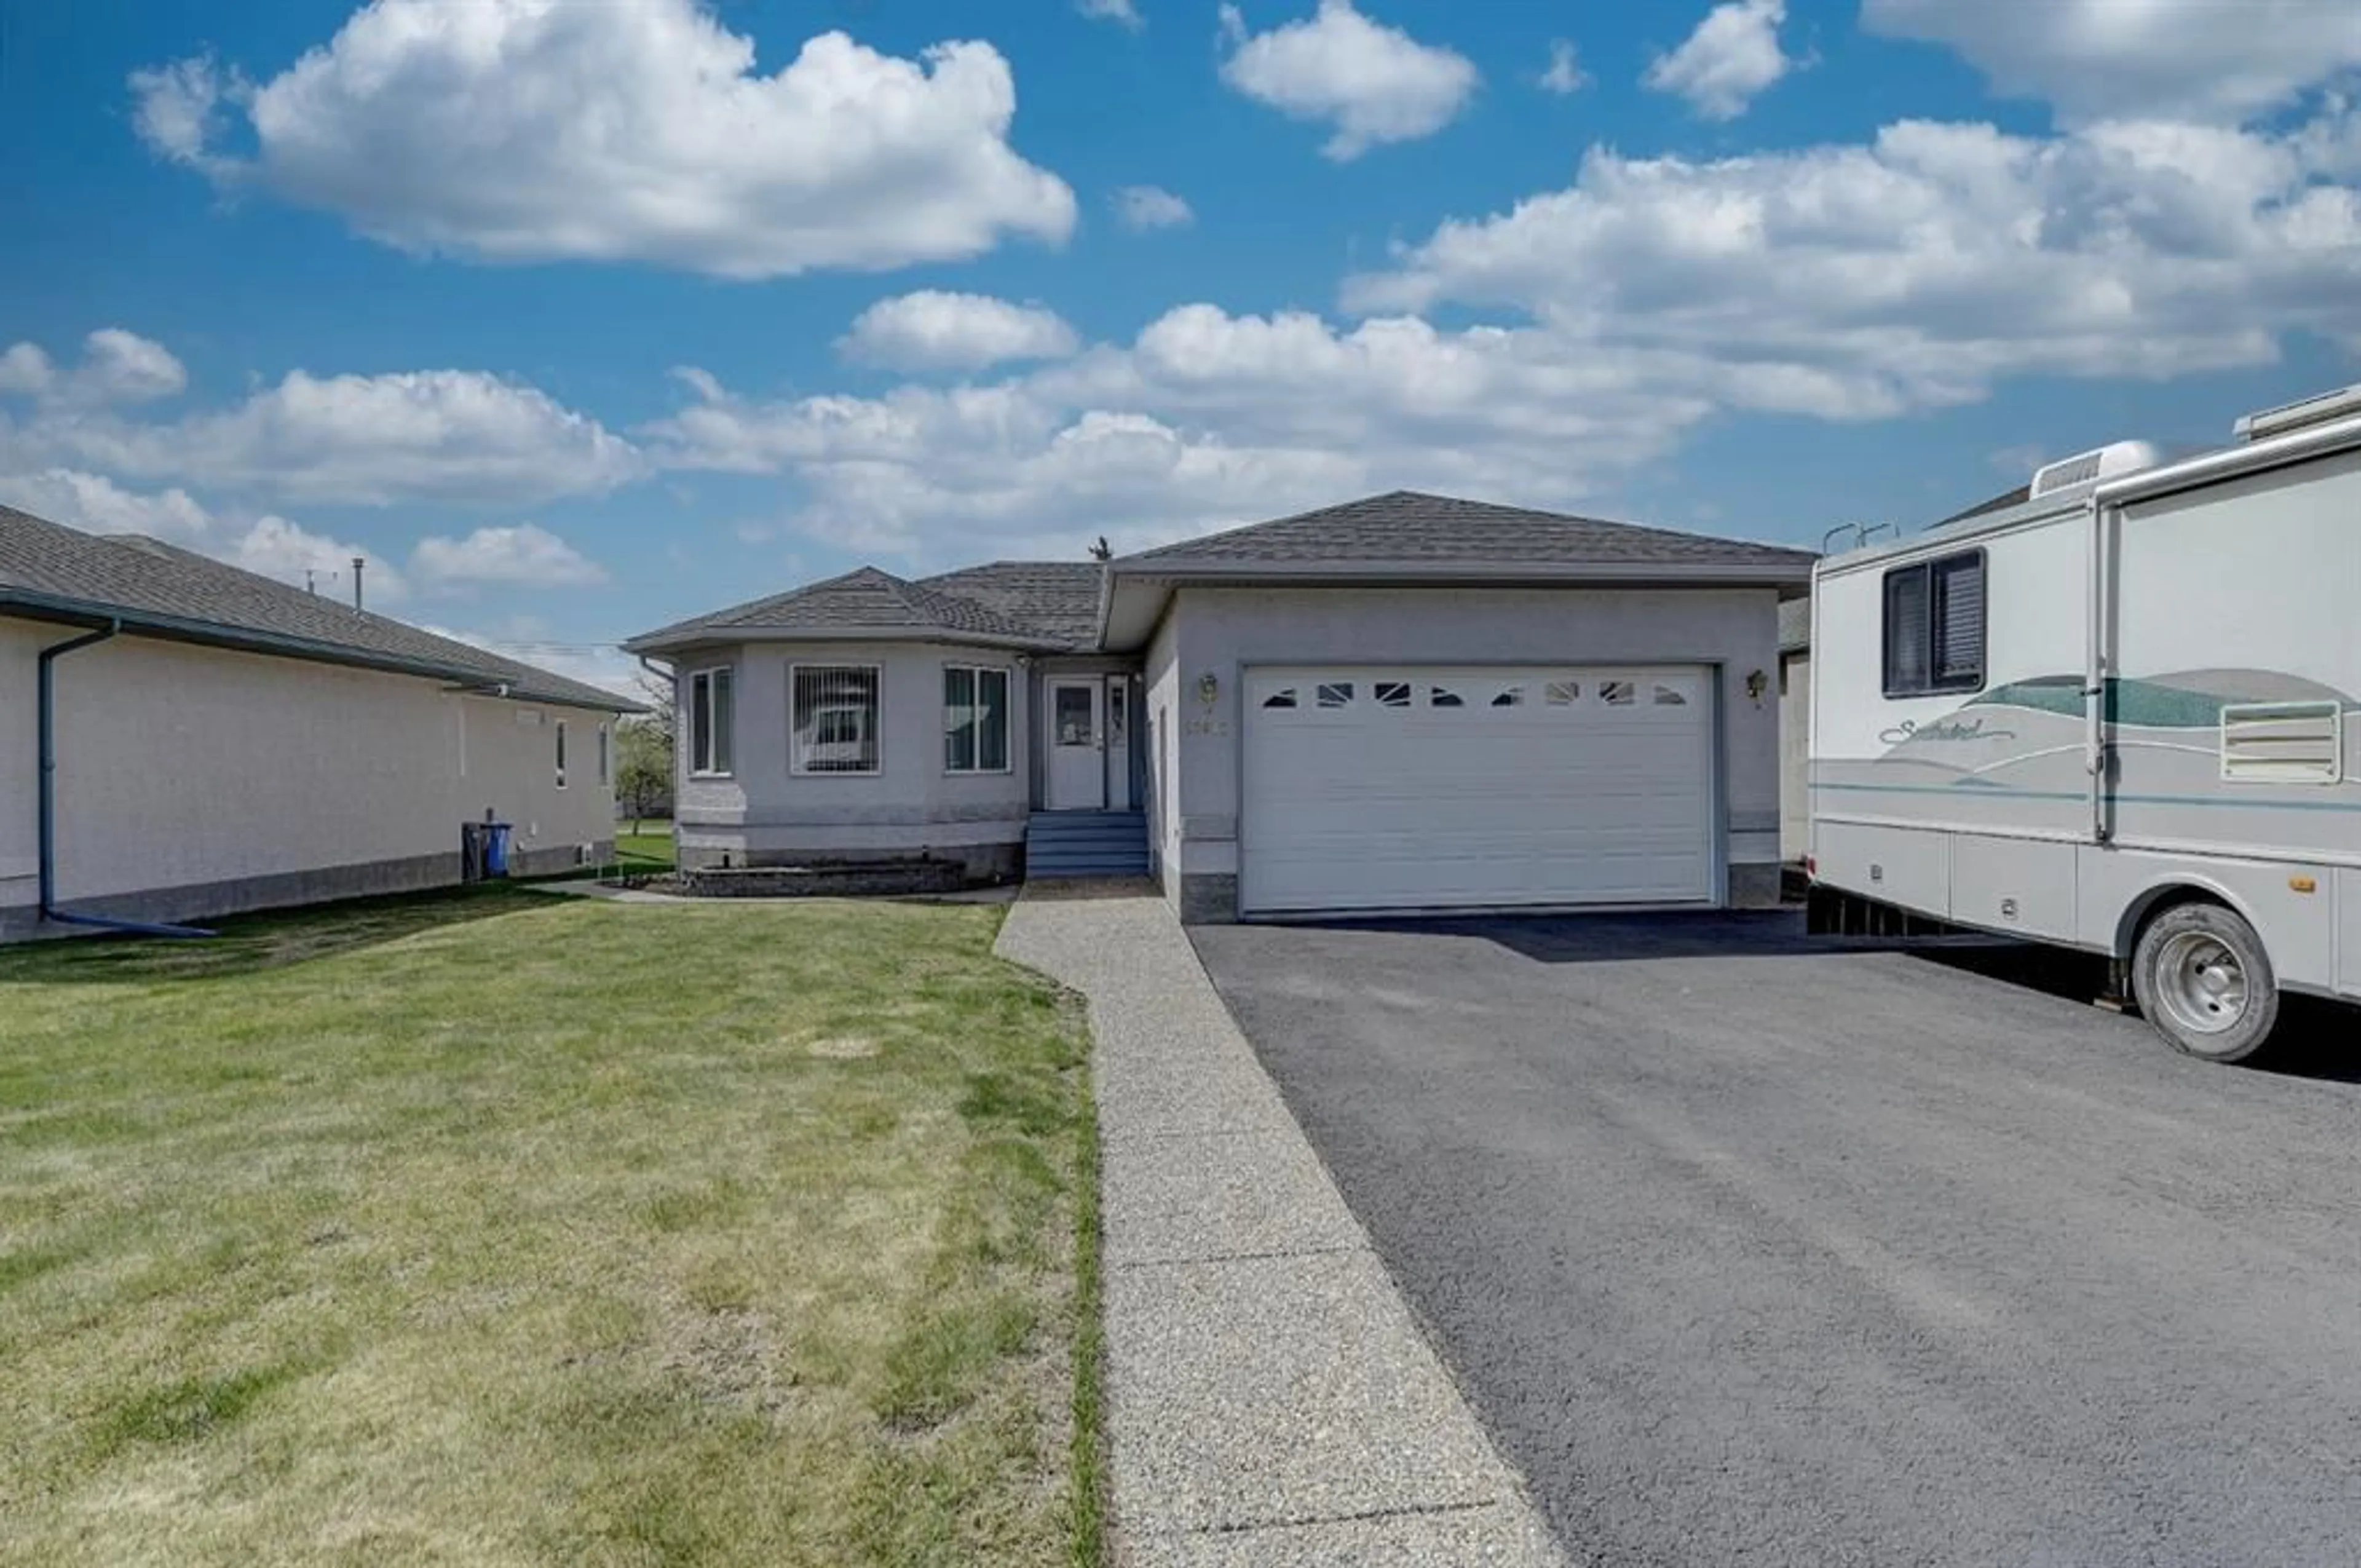 Frontside or backside of a home for 11417 106 Ave, Fairview Alberta T0H 1L0